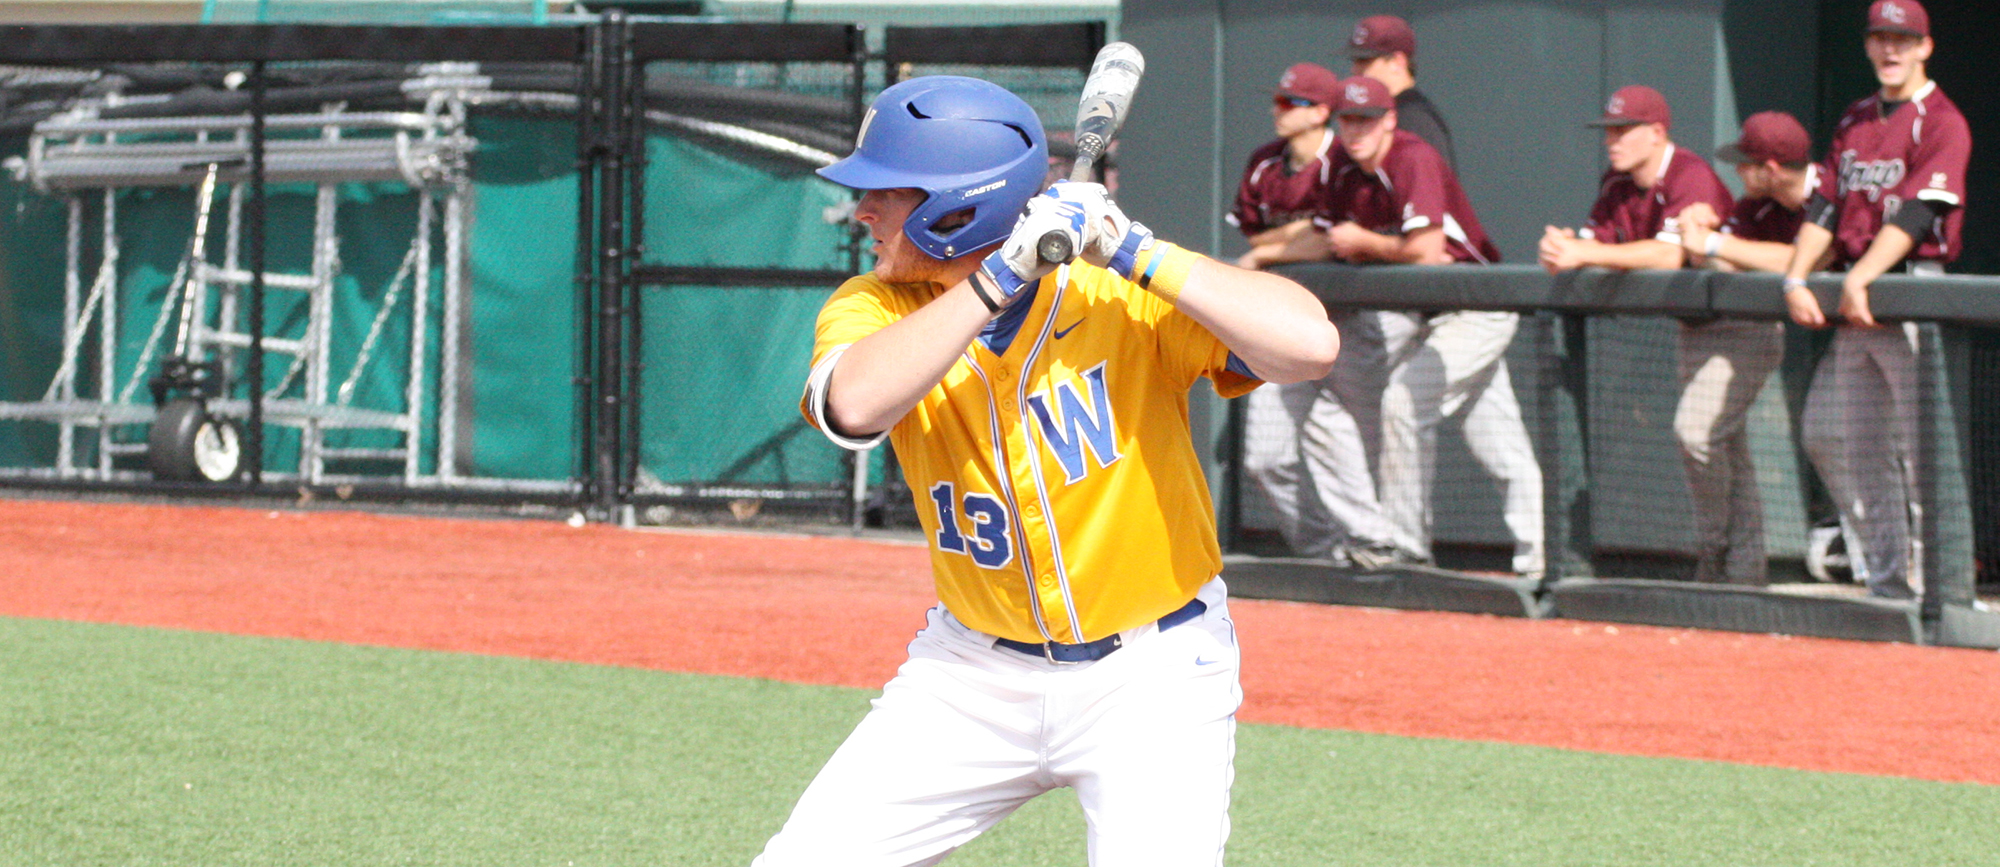 Western New England and Ramapo combined for 34 runs and 36 hits in Thursday's NCAA Tournament contest at UMass Boston. (Photo by Jeff Rosenblatt)